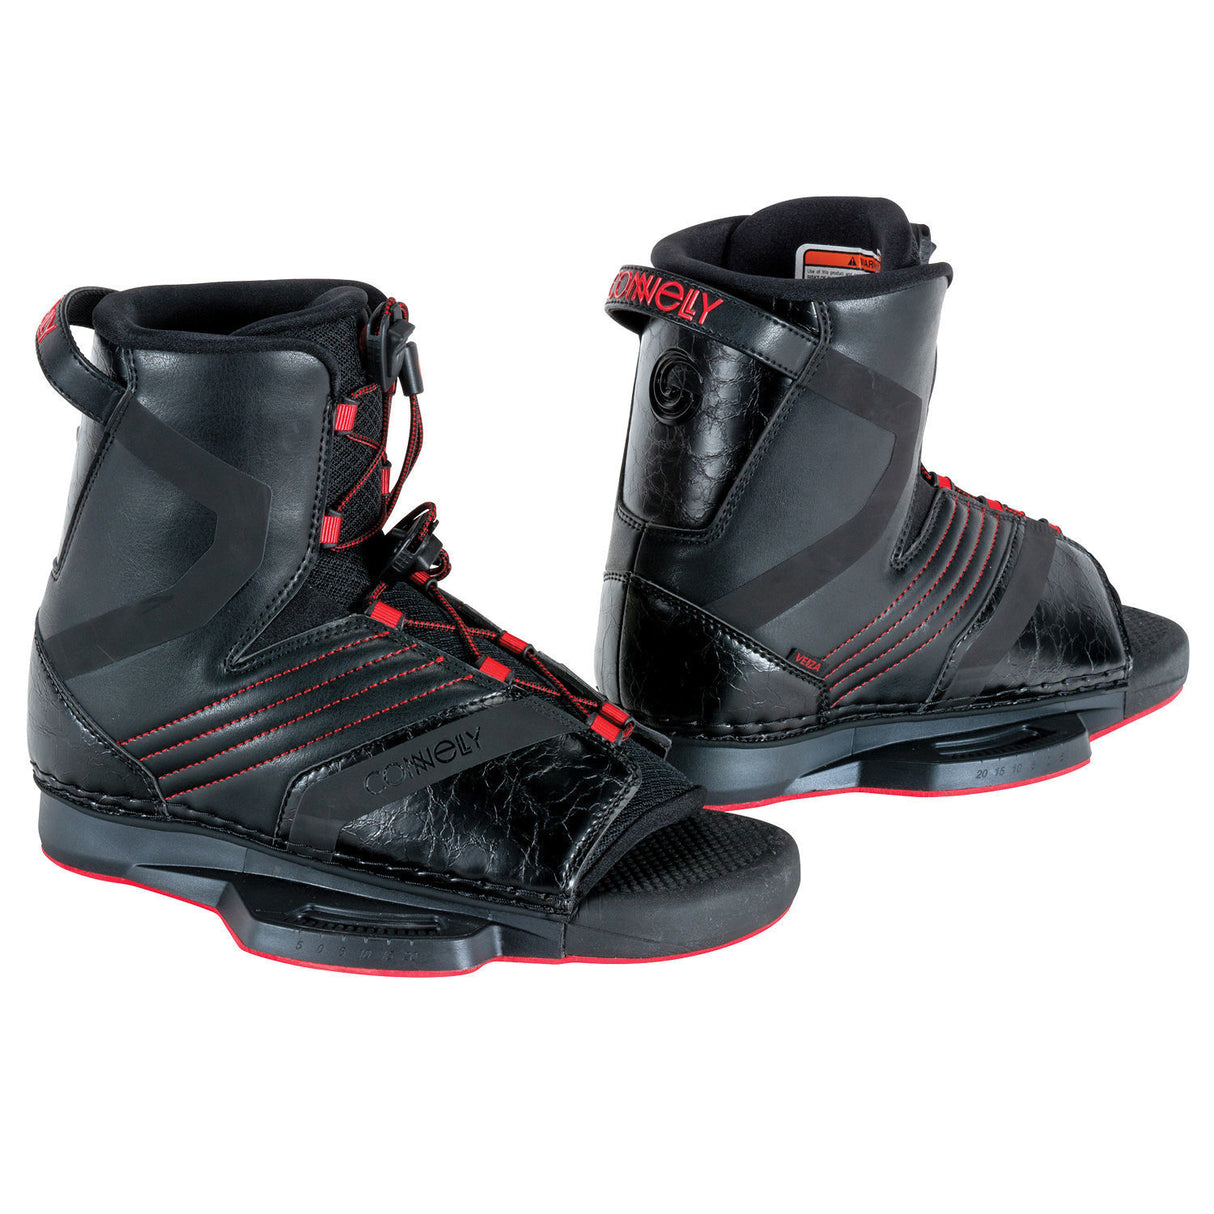 Connelly Venza Wakeboard Bindings 2021